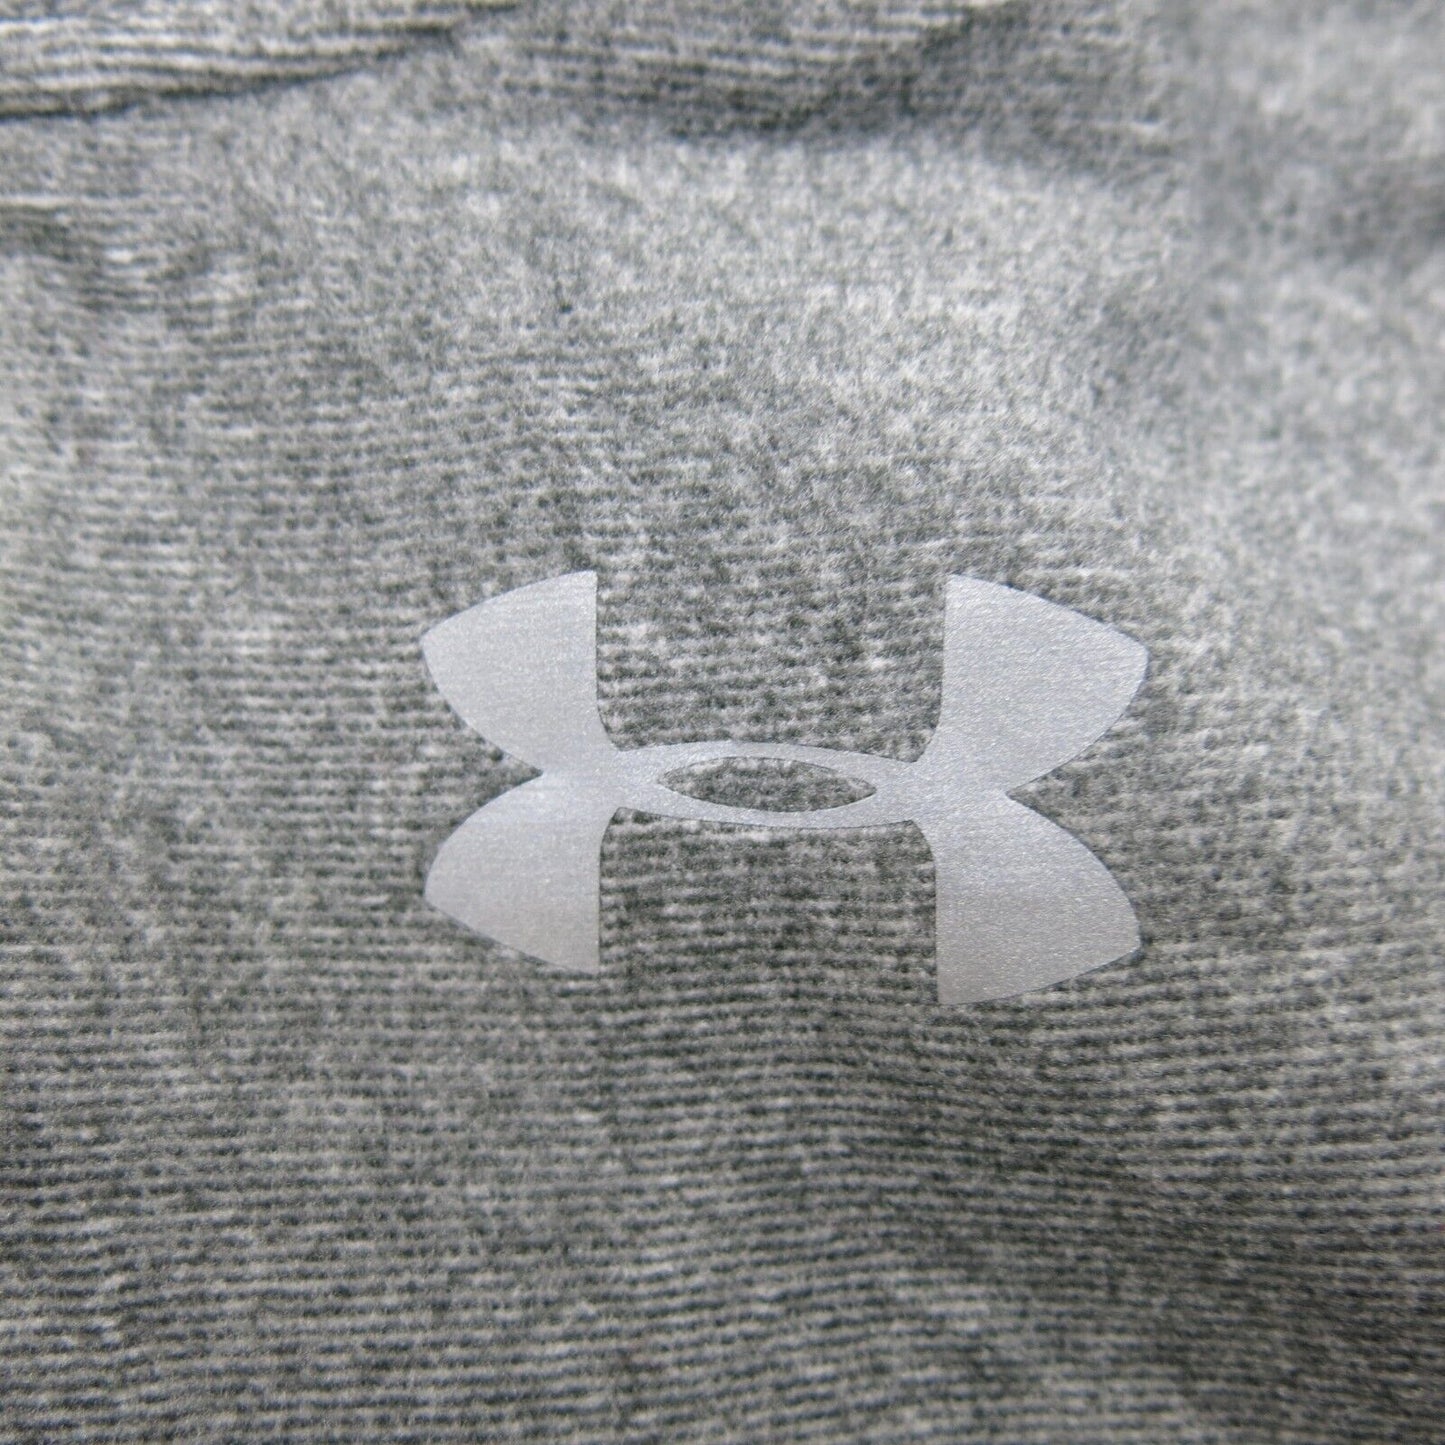 Under Armour Sports Jacket Youth Boys X-Large Gray Cold Gear Athletics Jacket